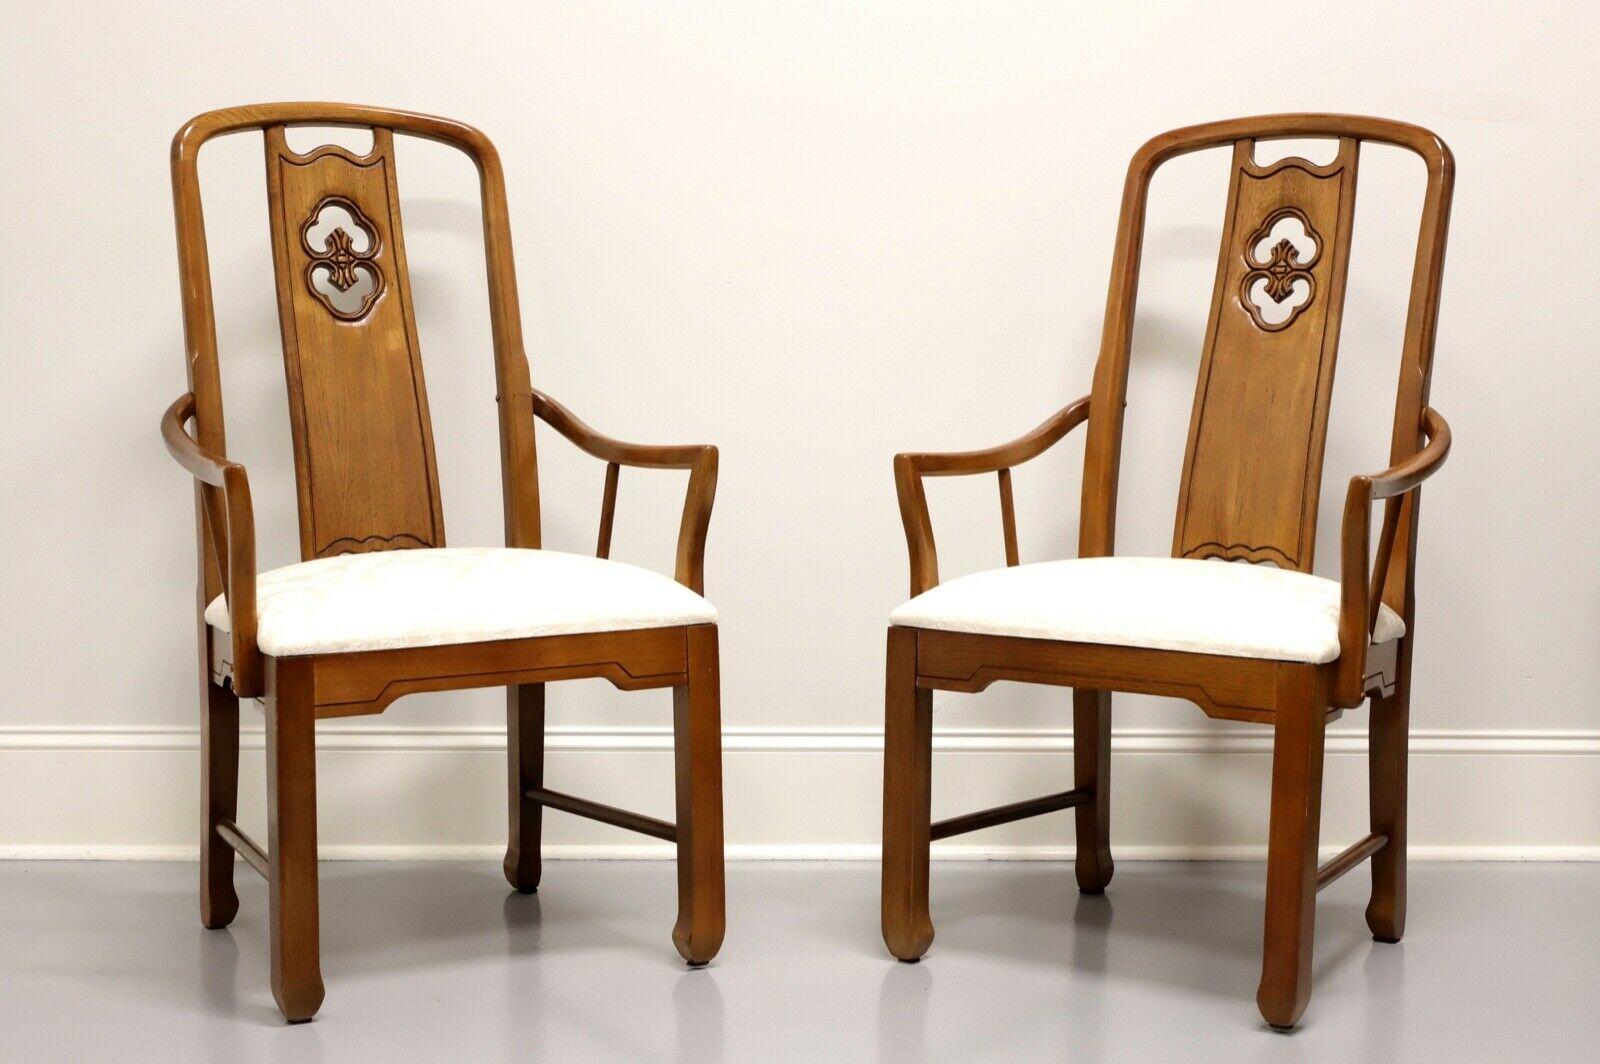 THOMASVILLE Mystique Asian Chinoiserie Dining Captain's Armchairs - Pair 4